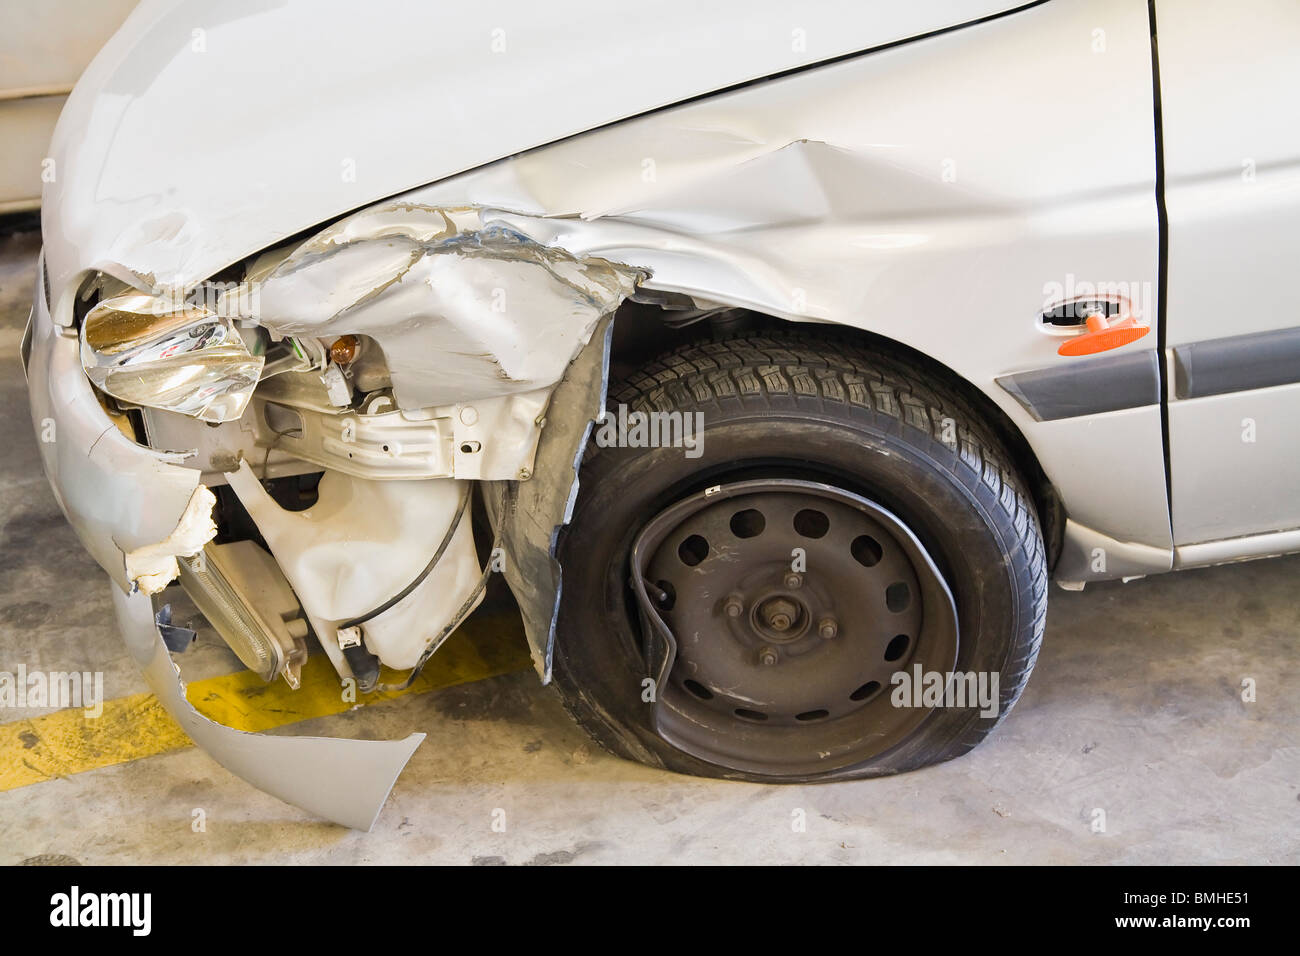 Smashed Car; Car With Smashed Front Fender And A Flat Tire Stock Photo